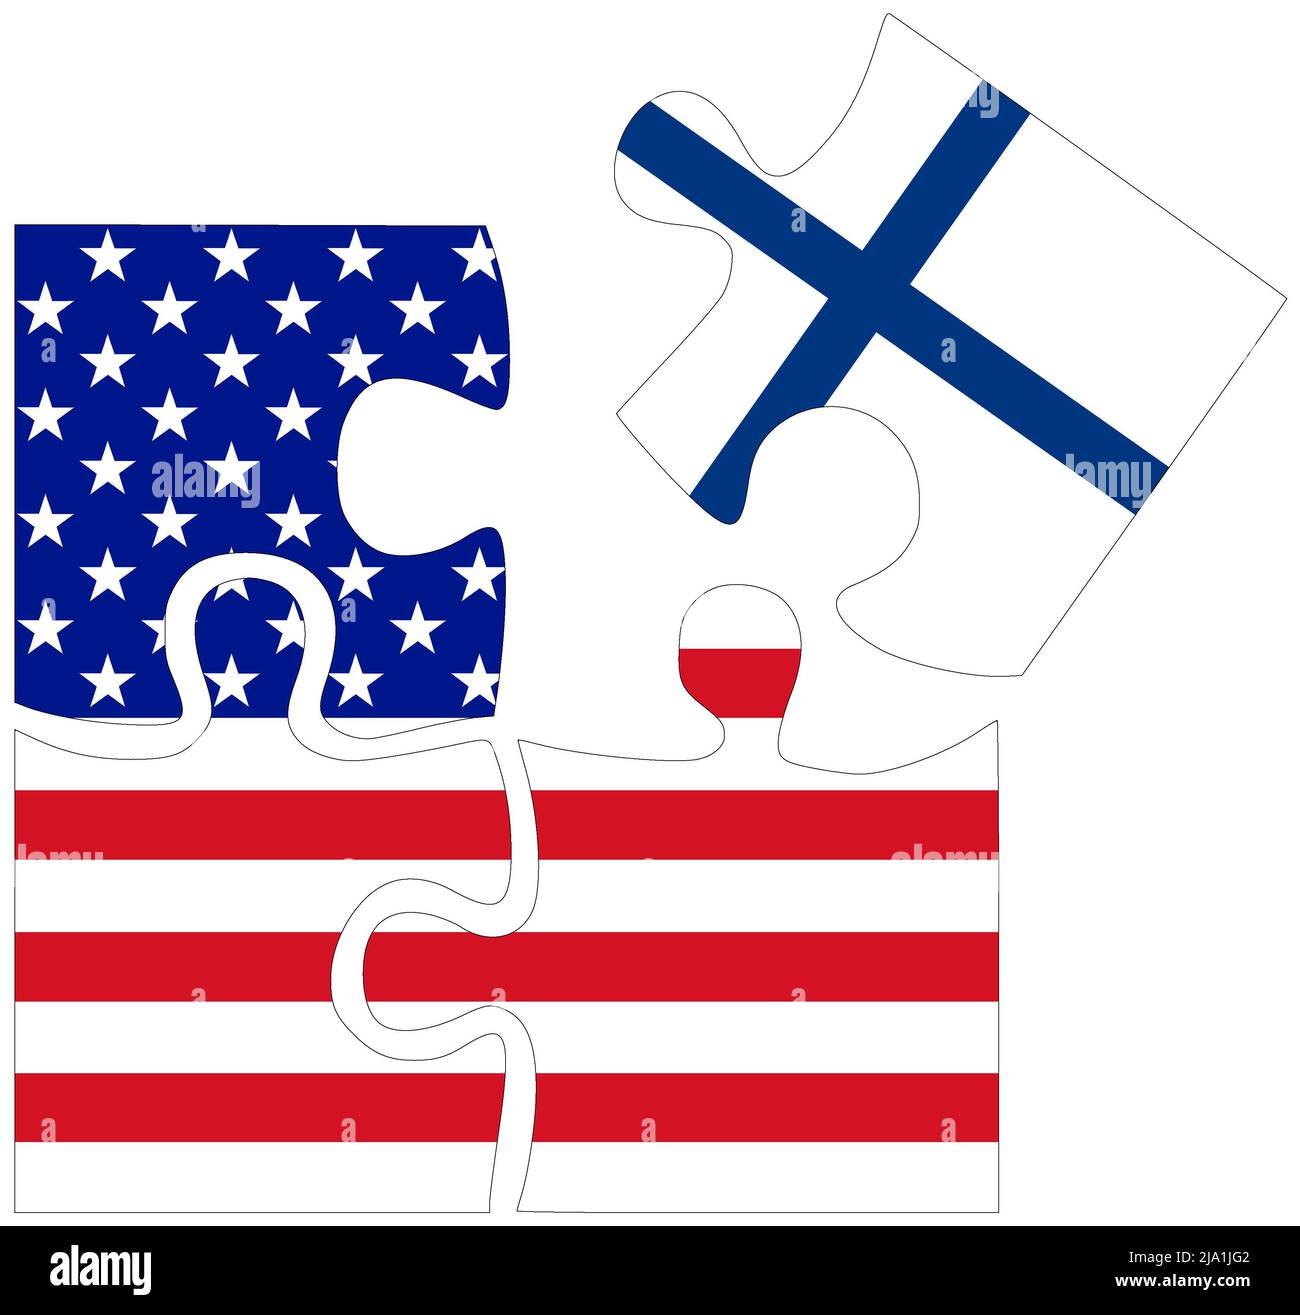 USA - Finland : puzzle shapes with flags, symbol of agreement or friendship Stock Photo